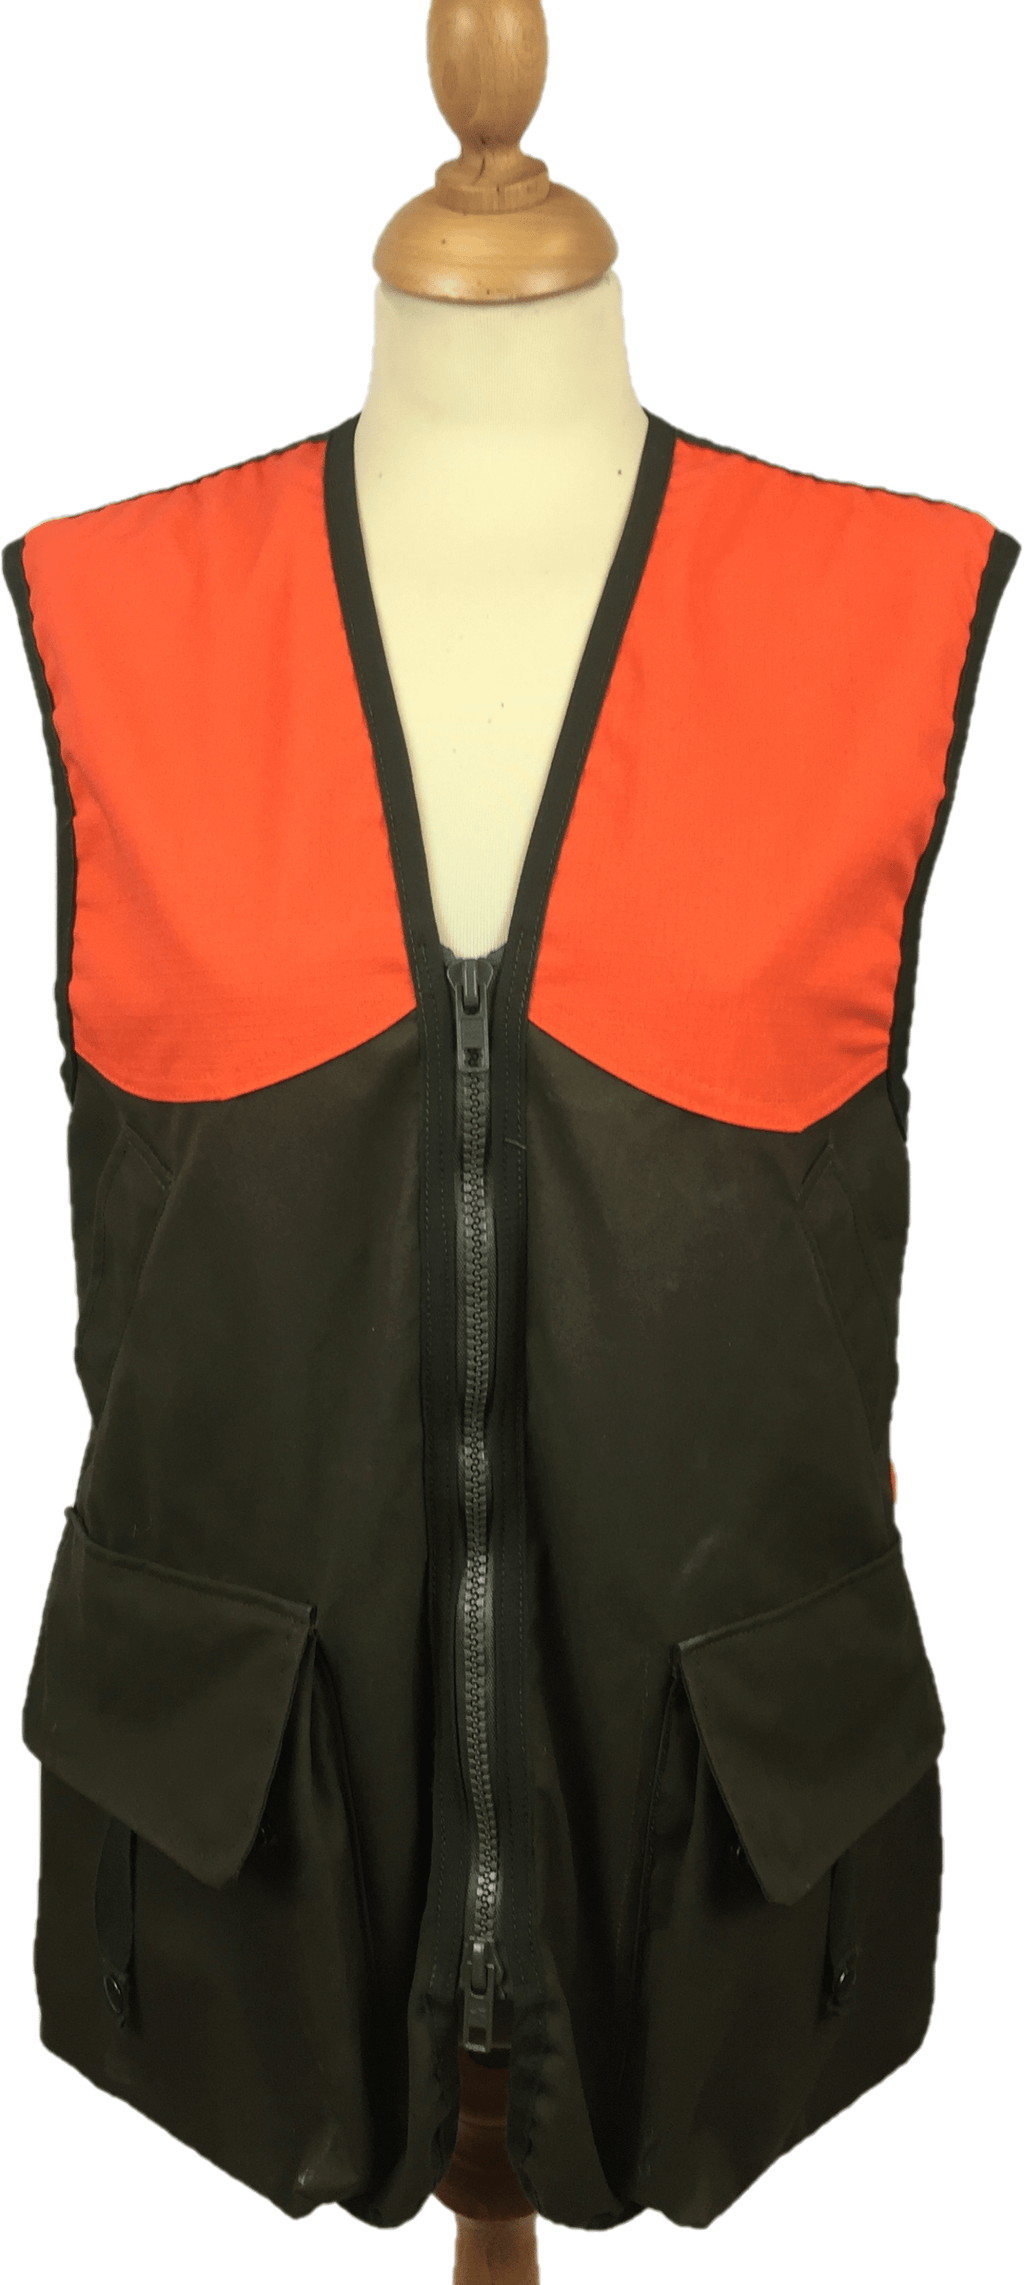 The Albany Upland Vest by Hound & Hare - Green and Orange - Hound & Hare